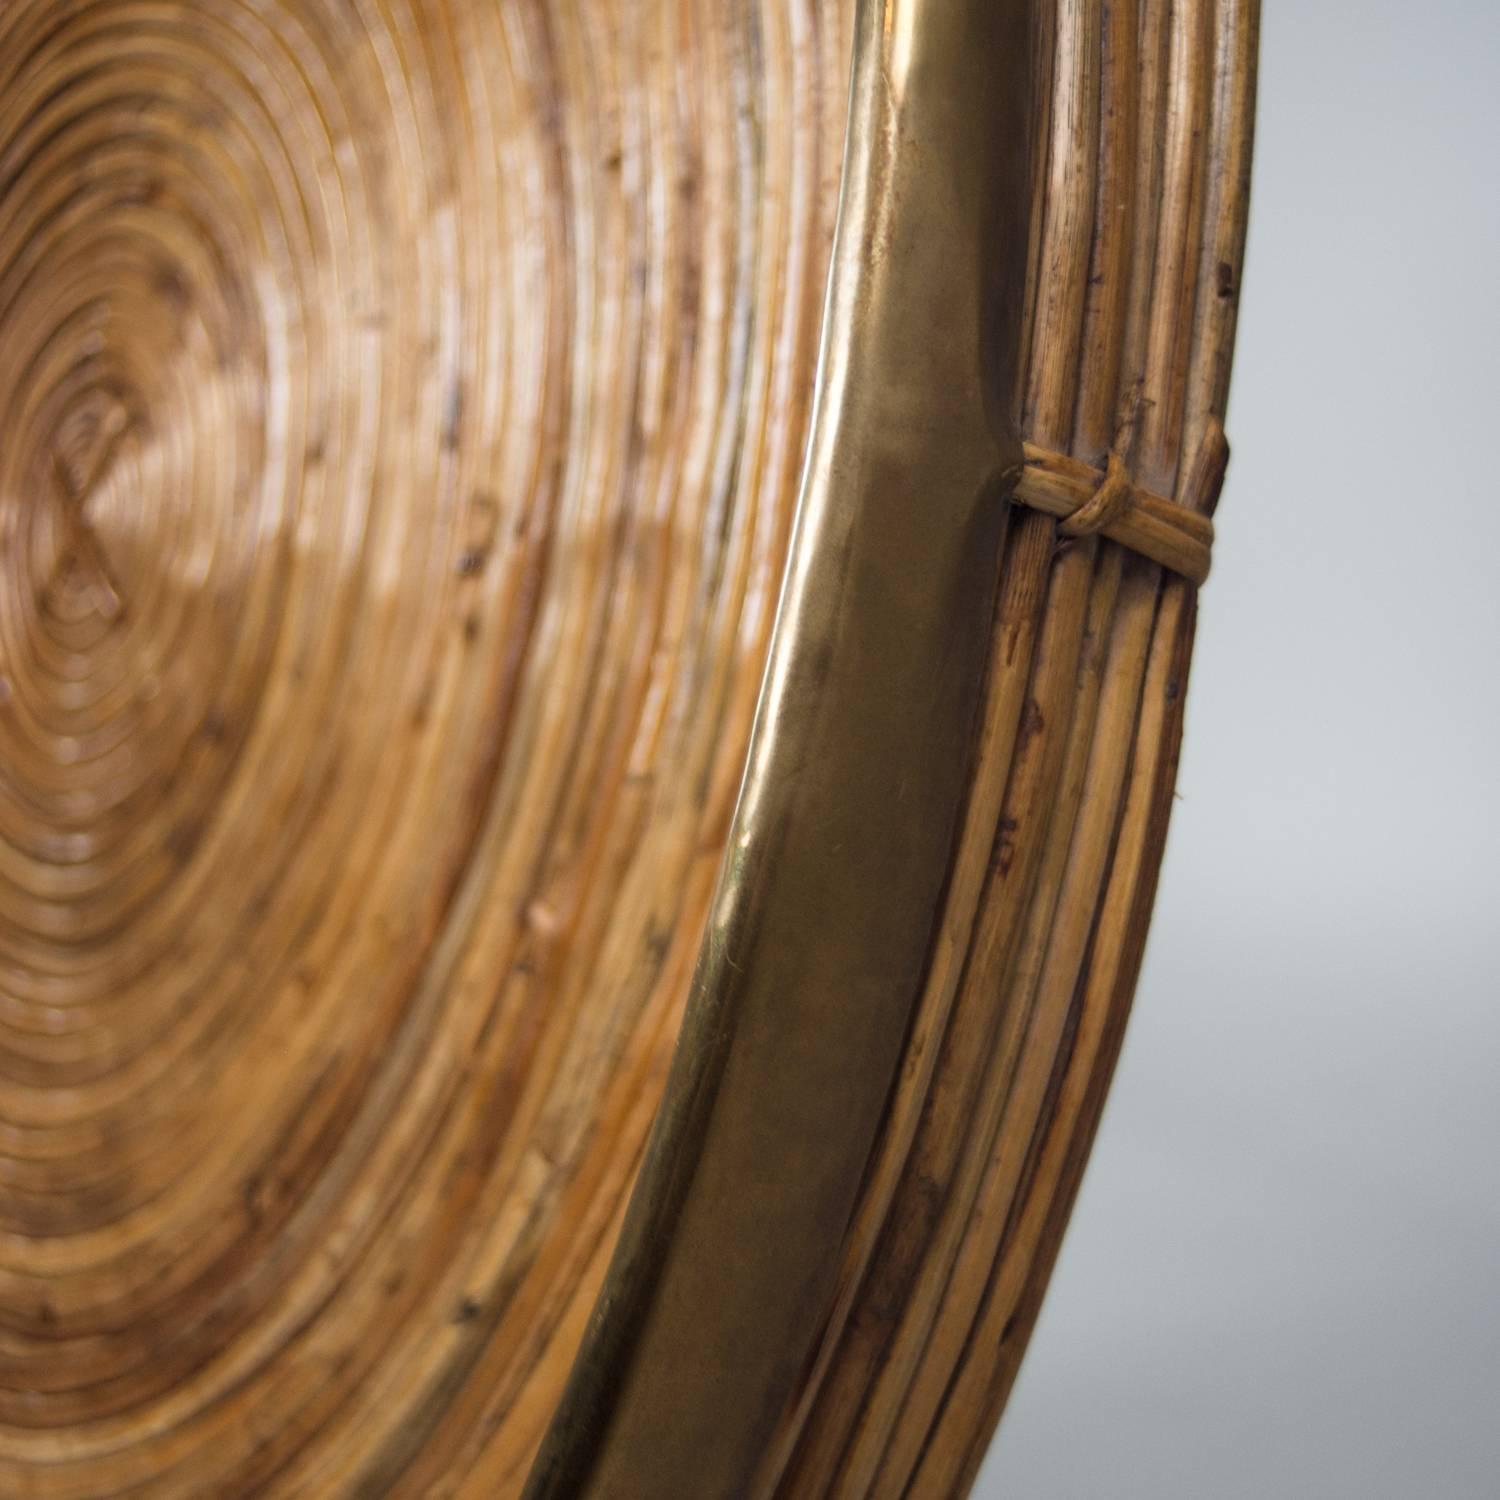 Concentric circles of bamboo reeds formed into a tray with a brass edge detail.